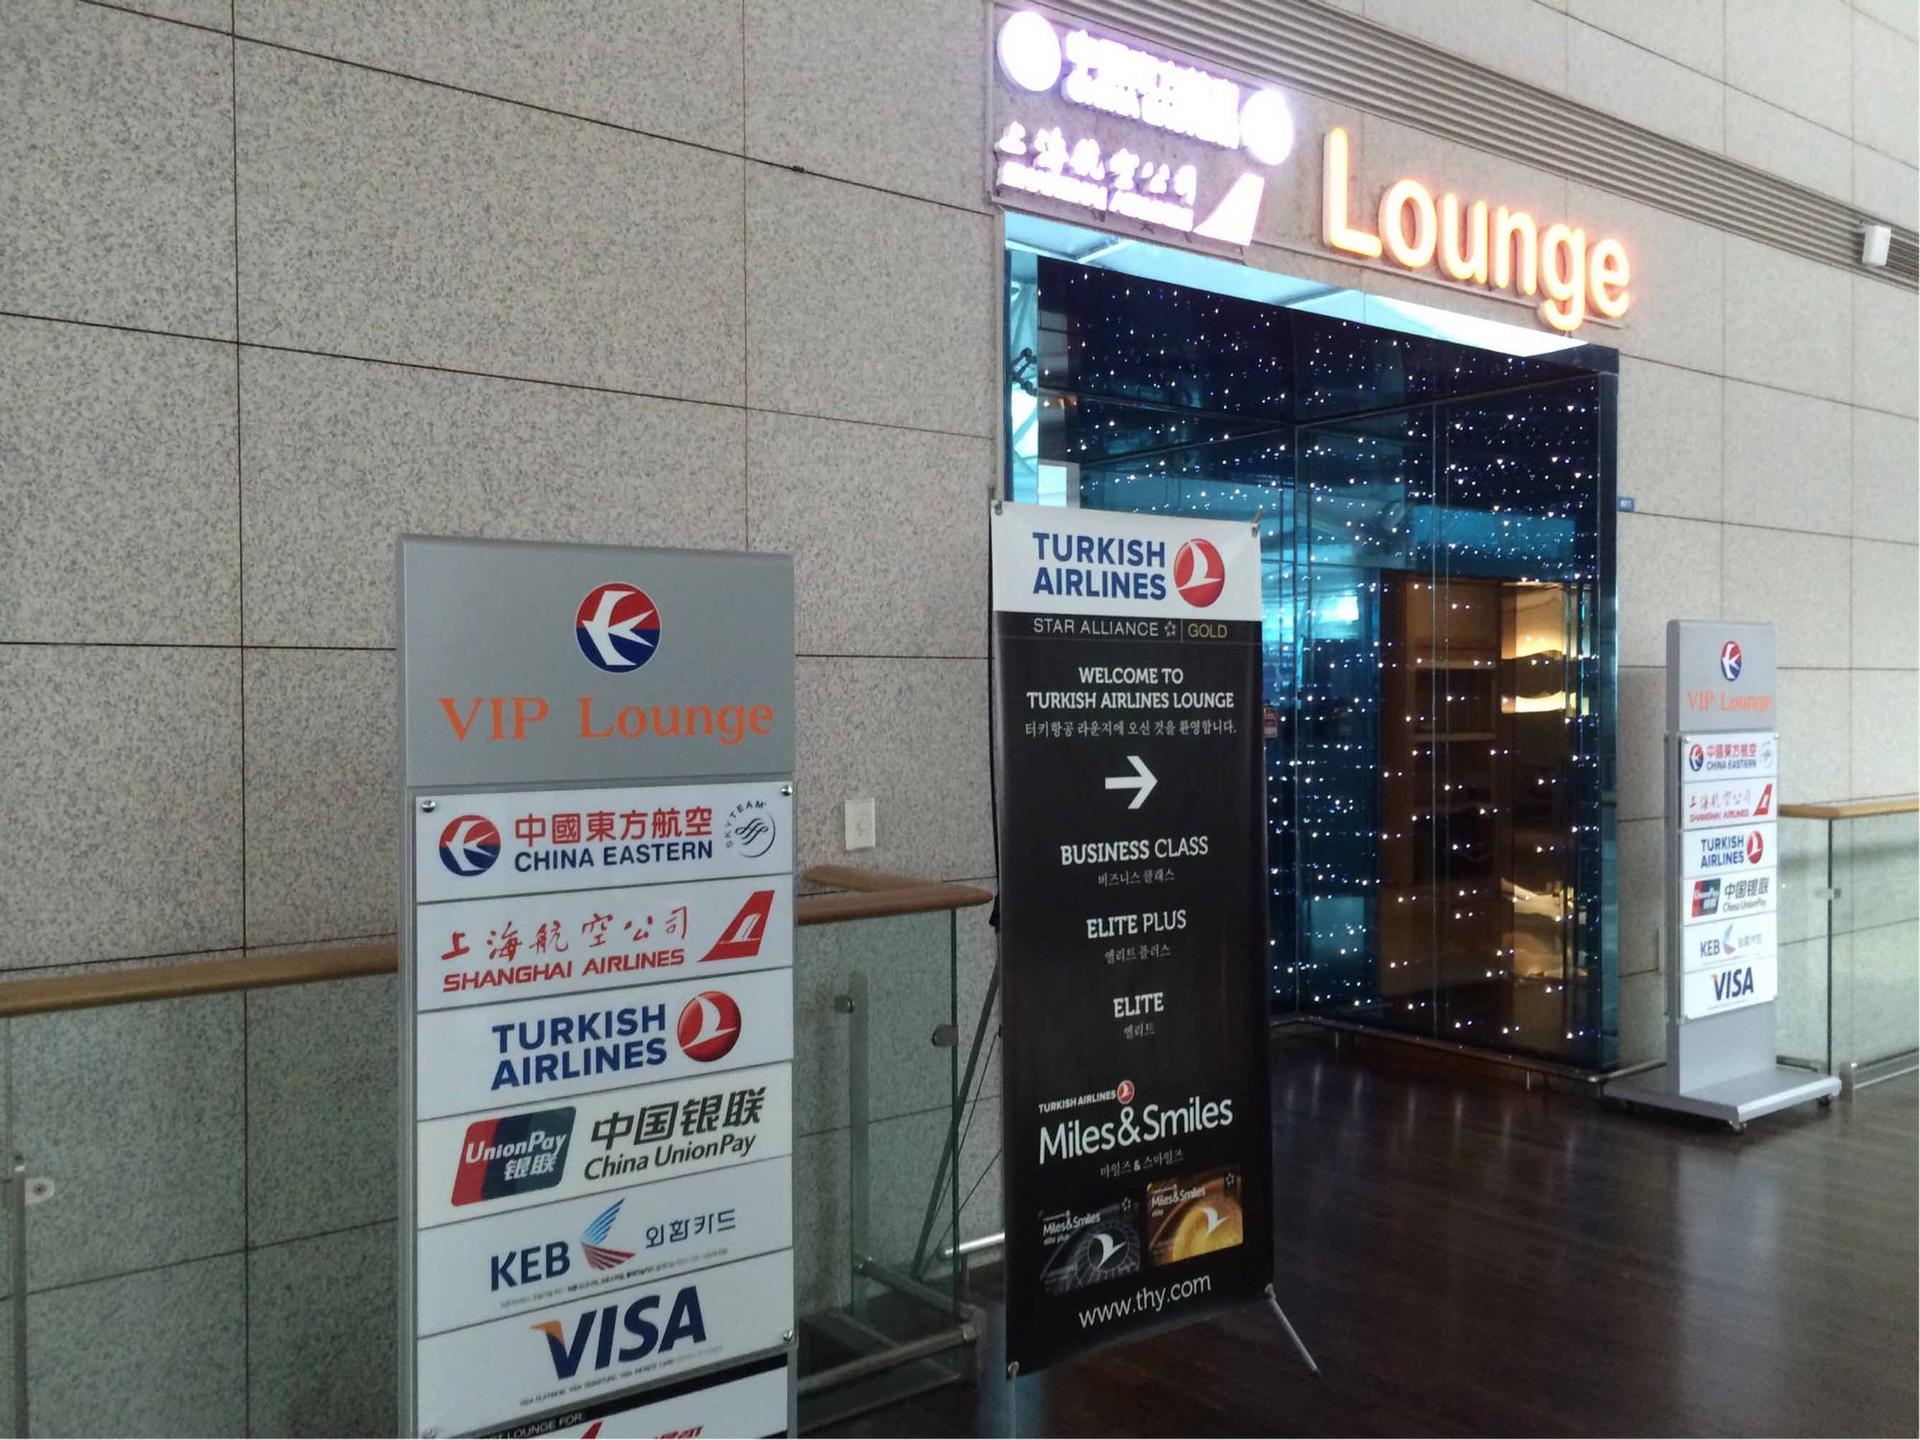 China Eastern/Shanghai Airlines VIP Lounge image 3 of 3